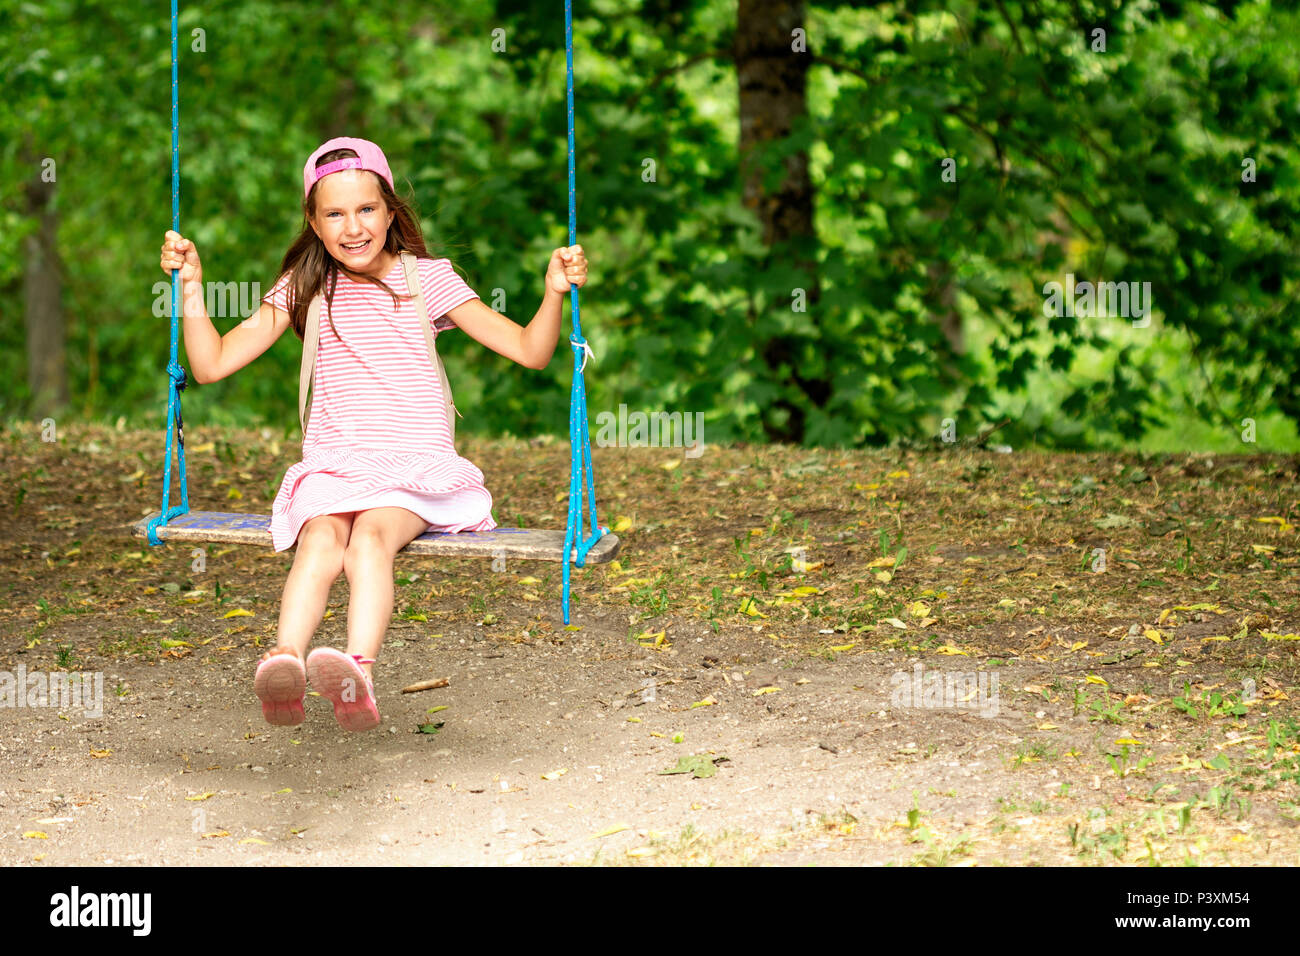 Little girl swinging on a sunny day with trees in the background Stock Photo